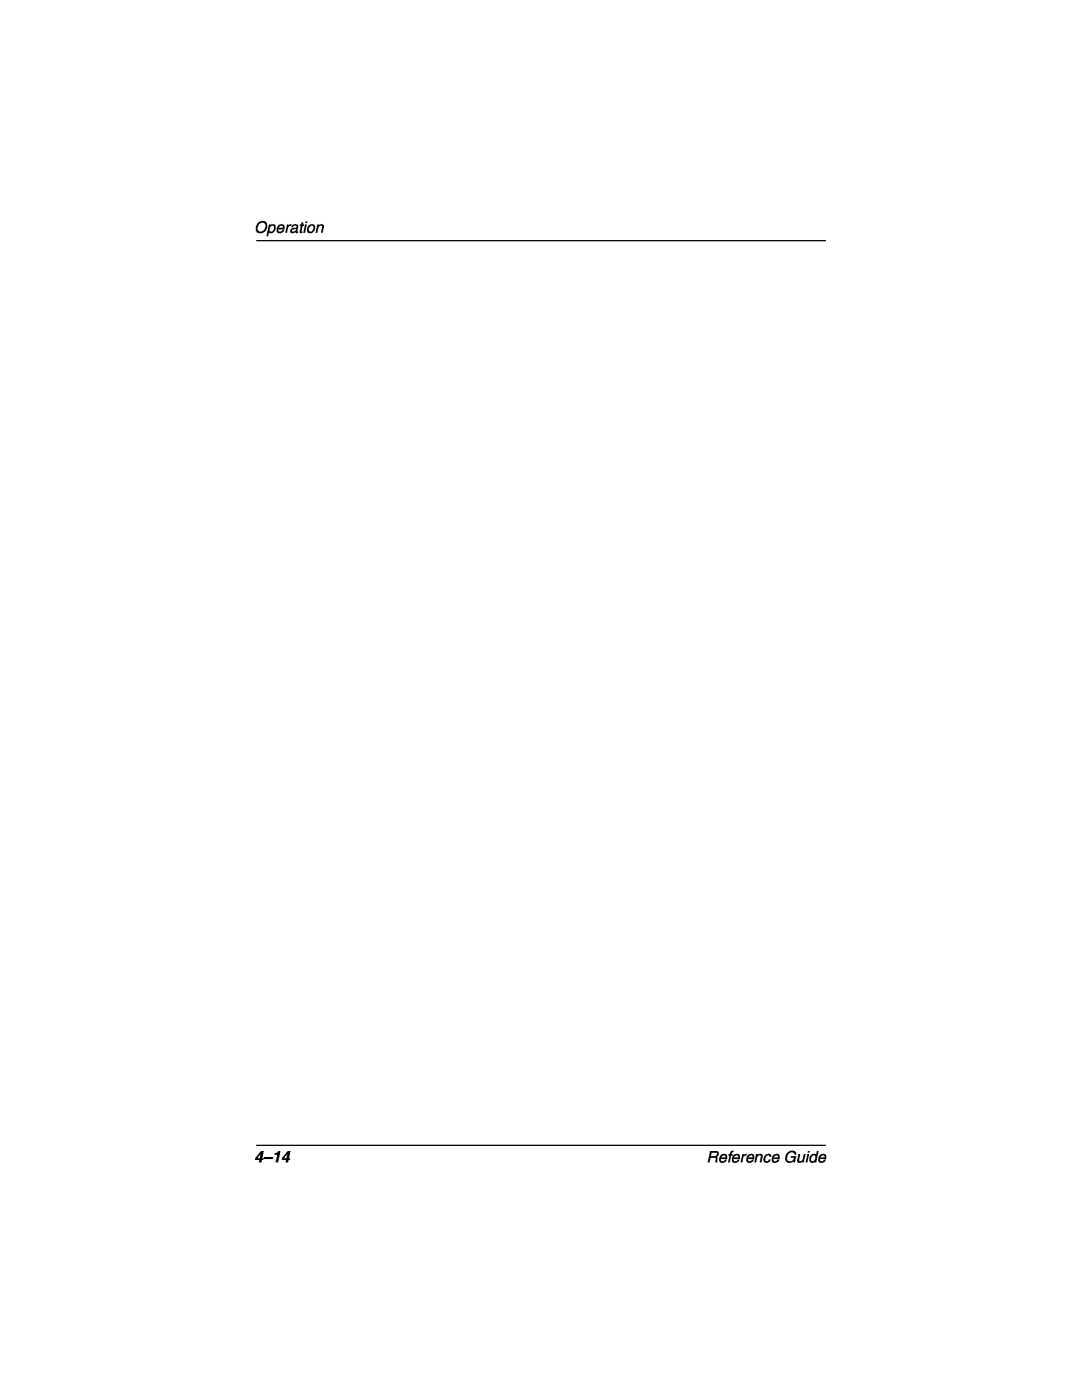 Compaq 5017 manual Operation, 4-14, Reference Guide 